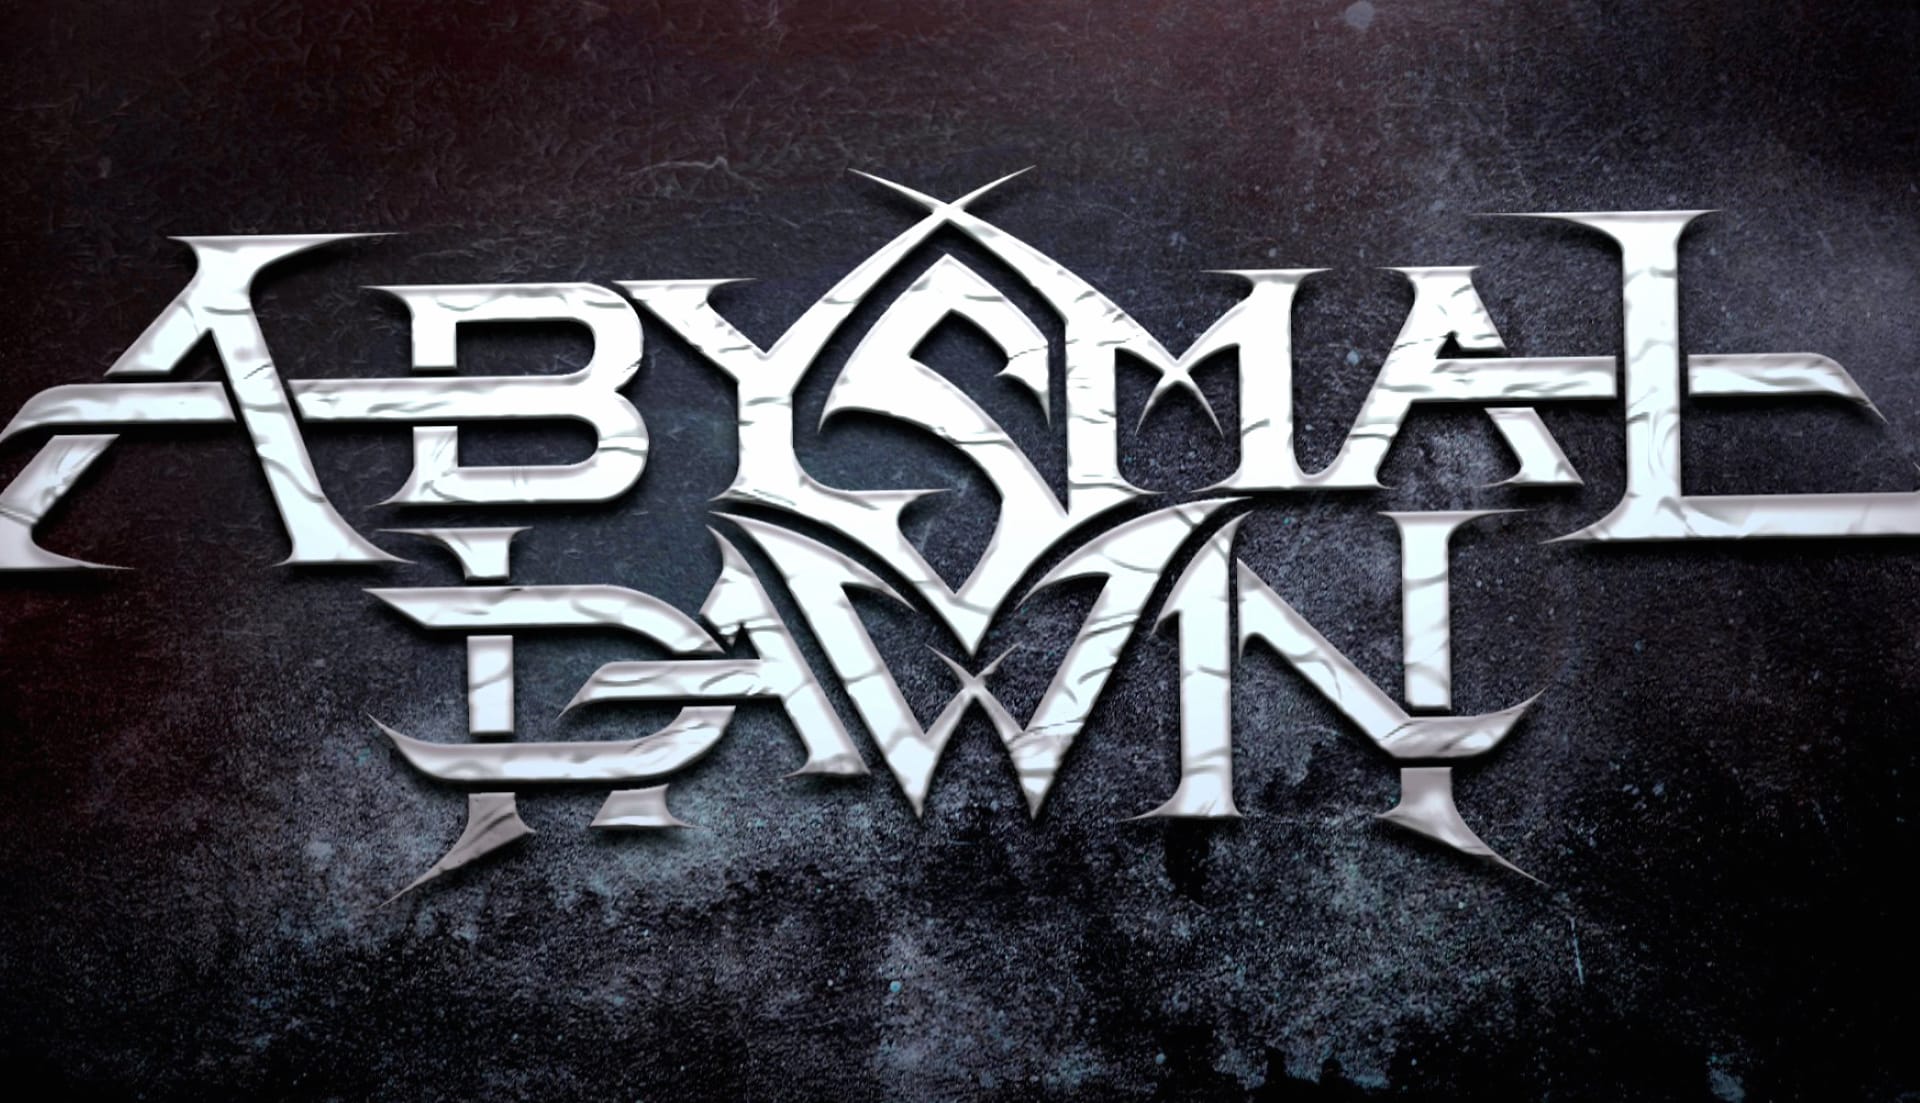 Abysmal Dawn wallpapers HD quality